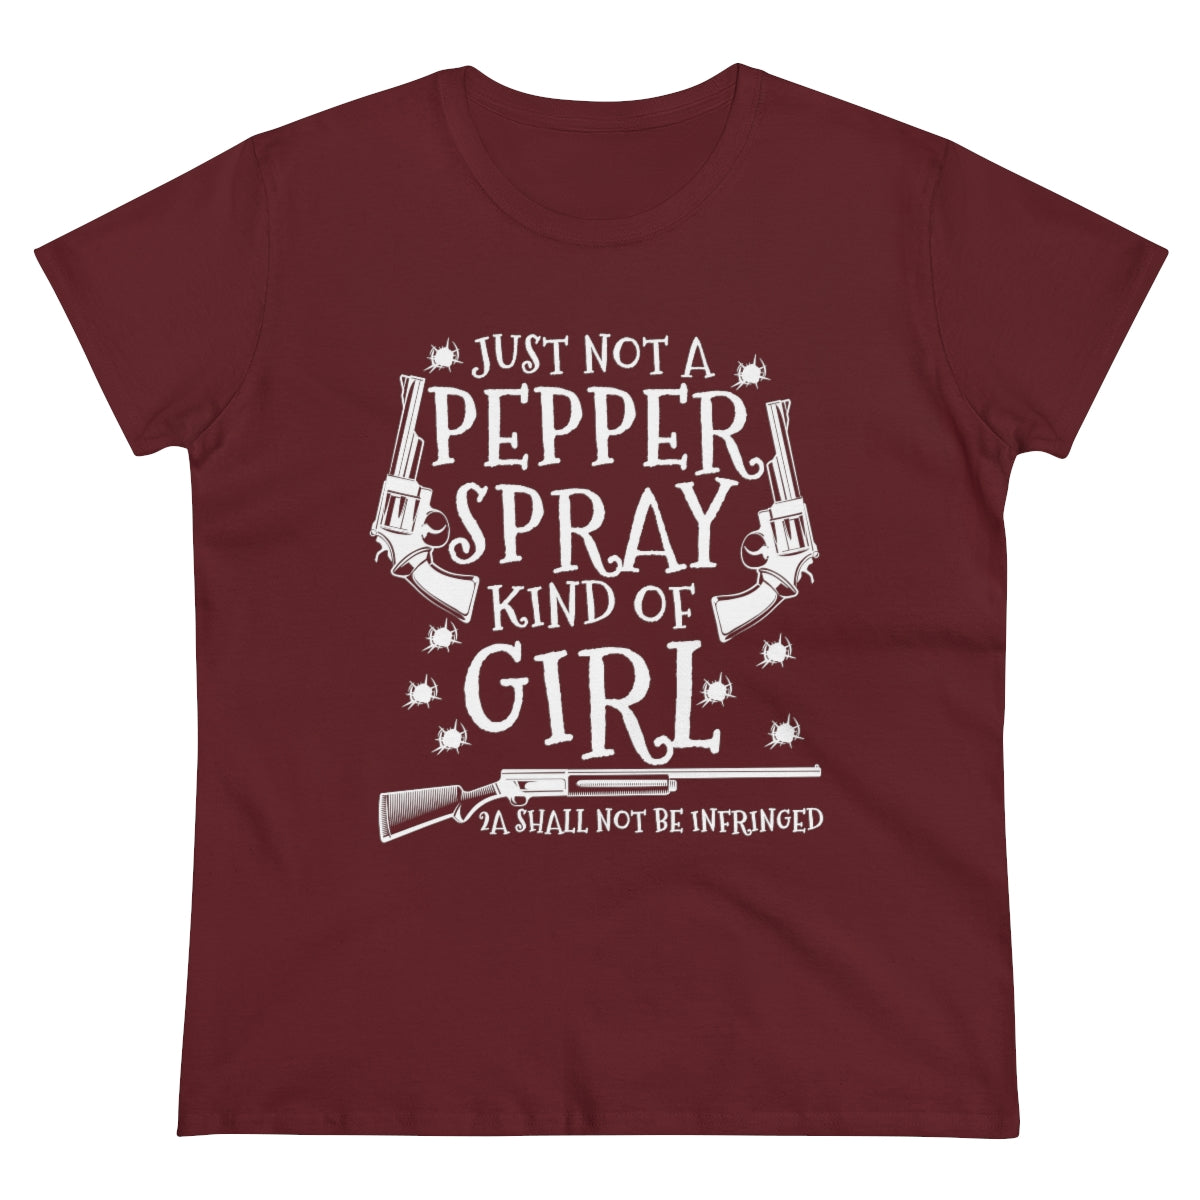 Just Not A Pepper Spray Kind of Girl | Women's Tee - Rise of The New Media